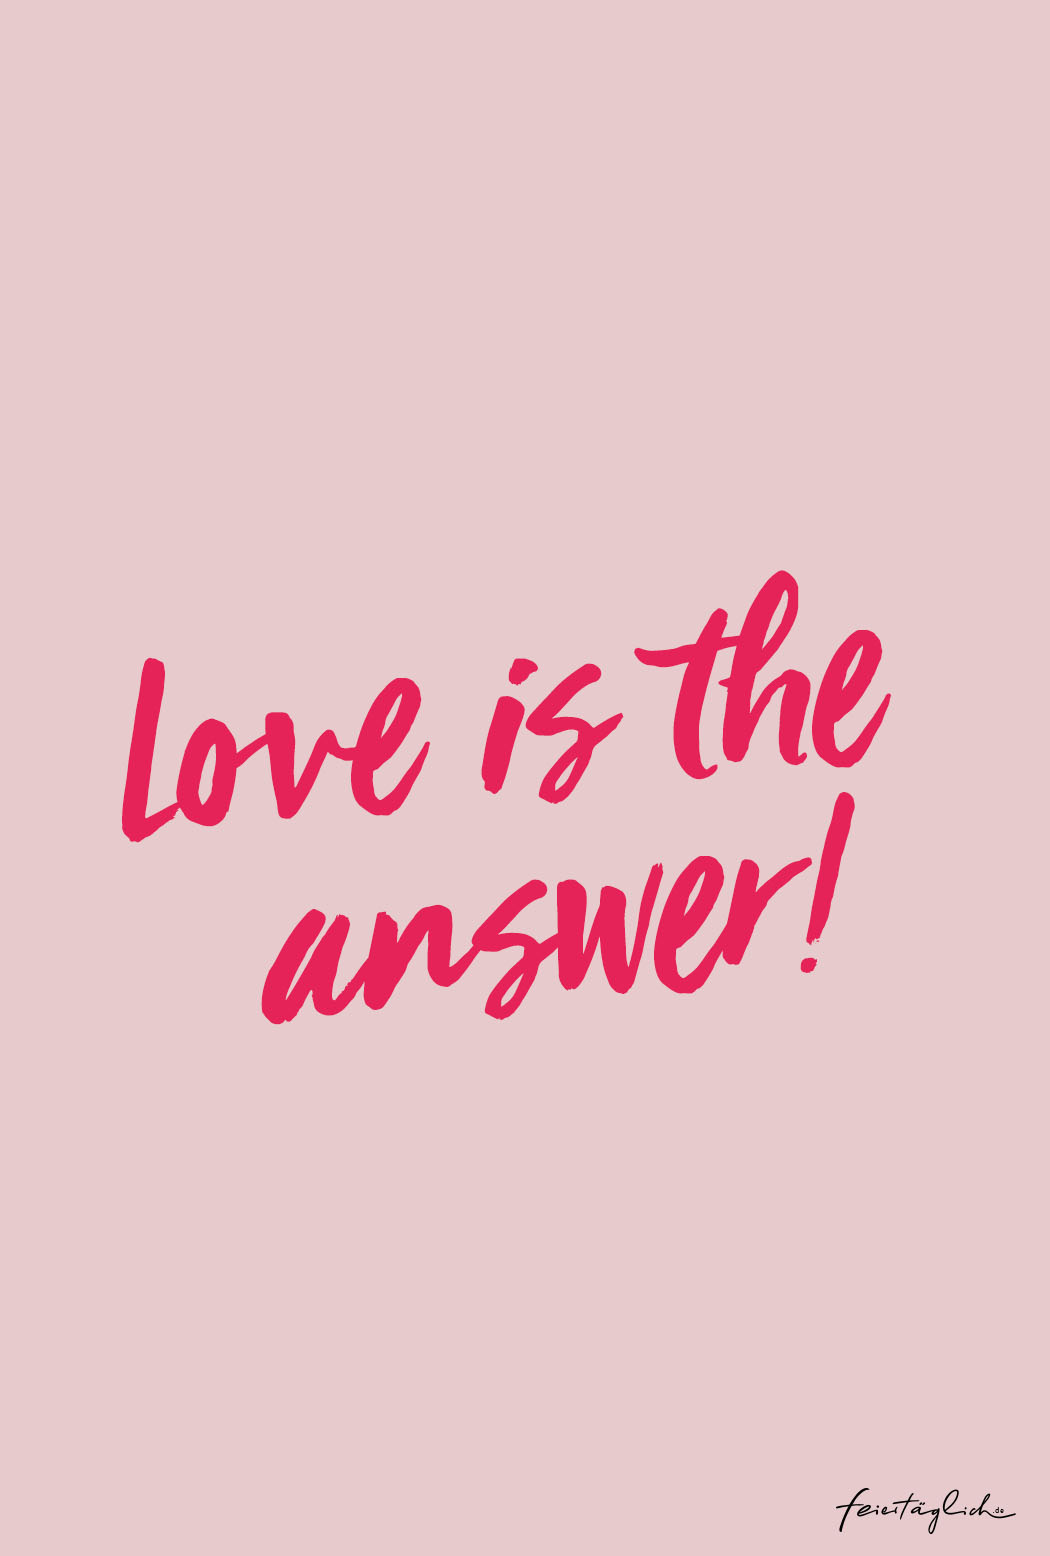 Love is the answer, quote